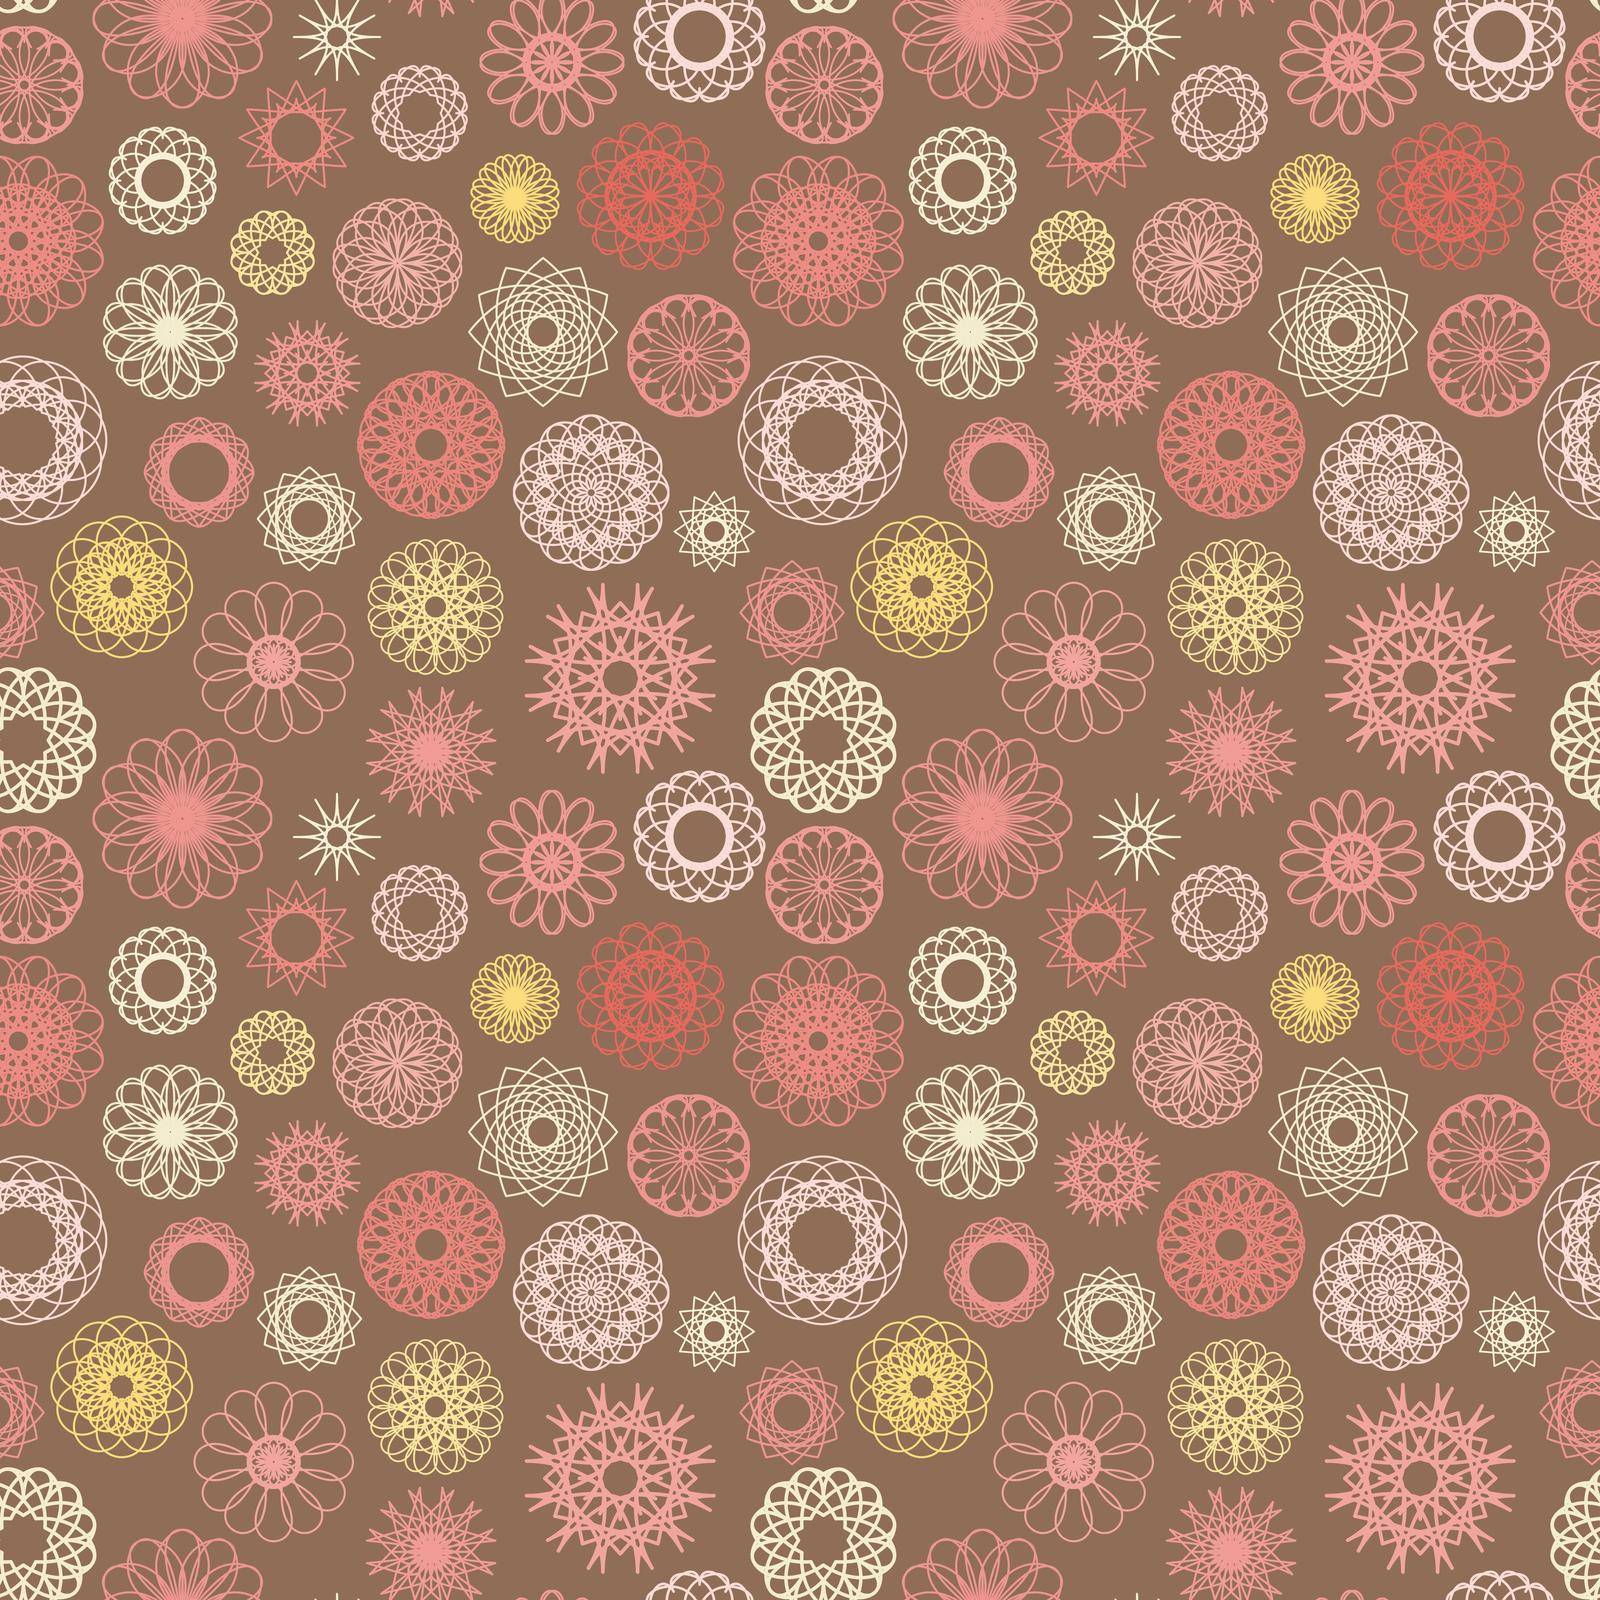 Chocolate round ornament seamless texture. Vector pattern